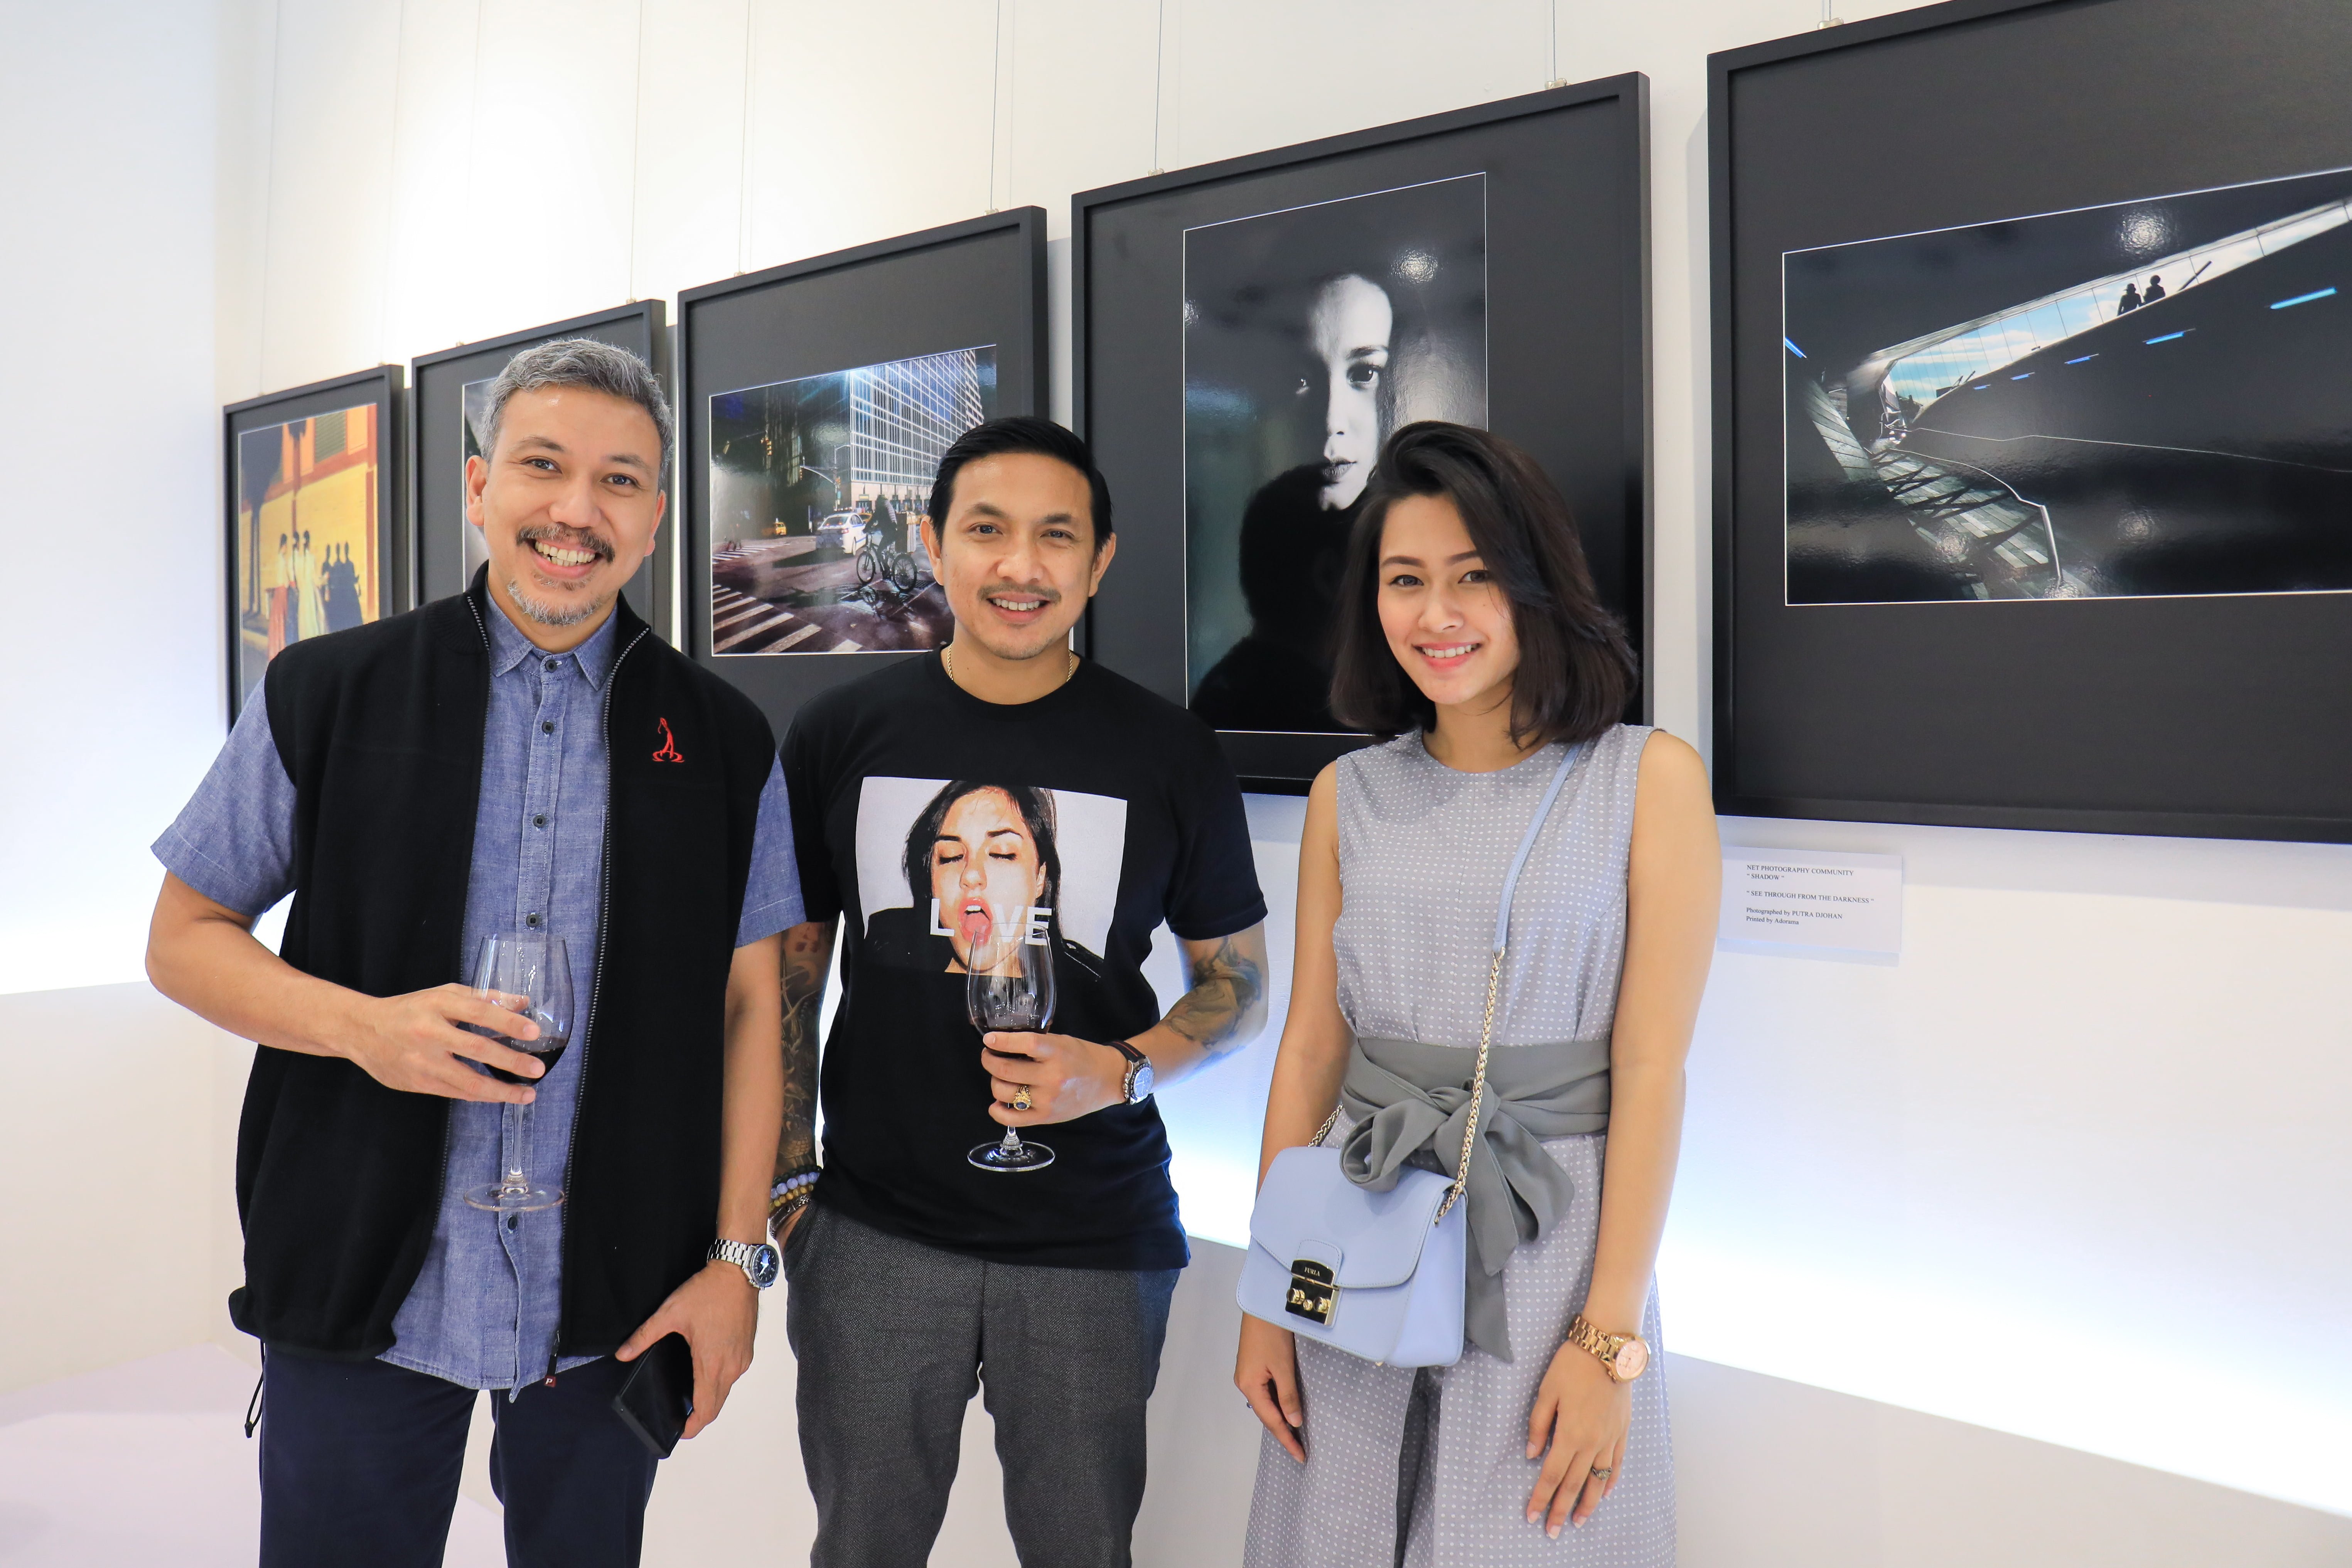 Professional photographer Mr Tommy A. Siahaan (centre), together with guests of Maserati Indonesia Mr Renaldi Hutasoit (left) and Ms Twindy Rarasati (right)